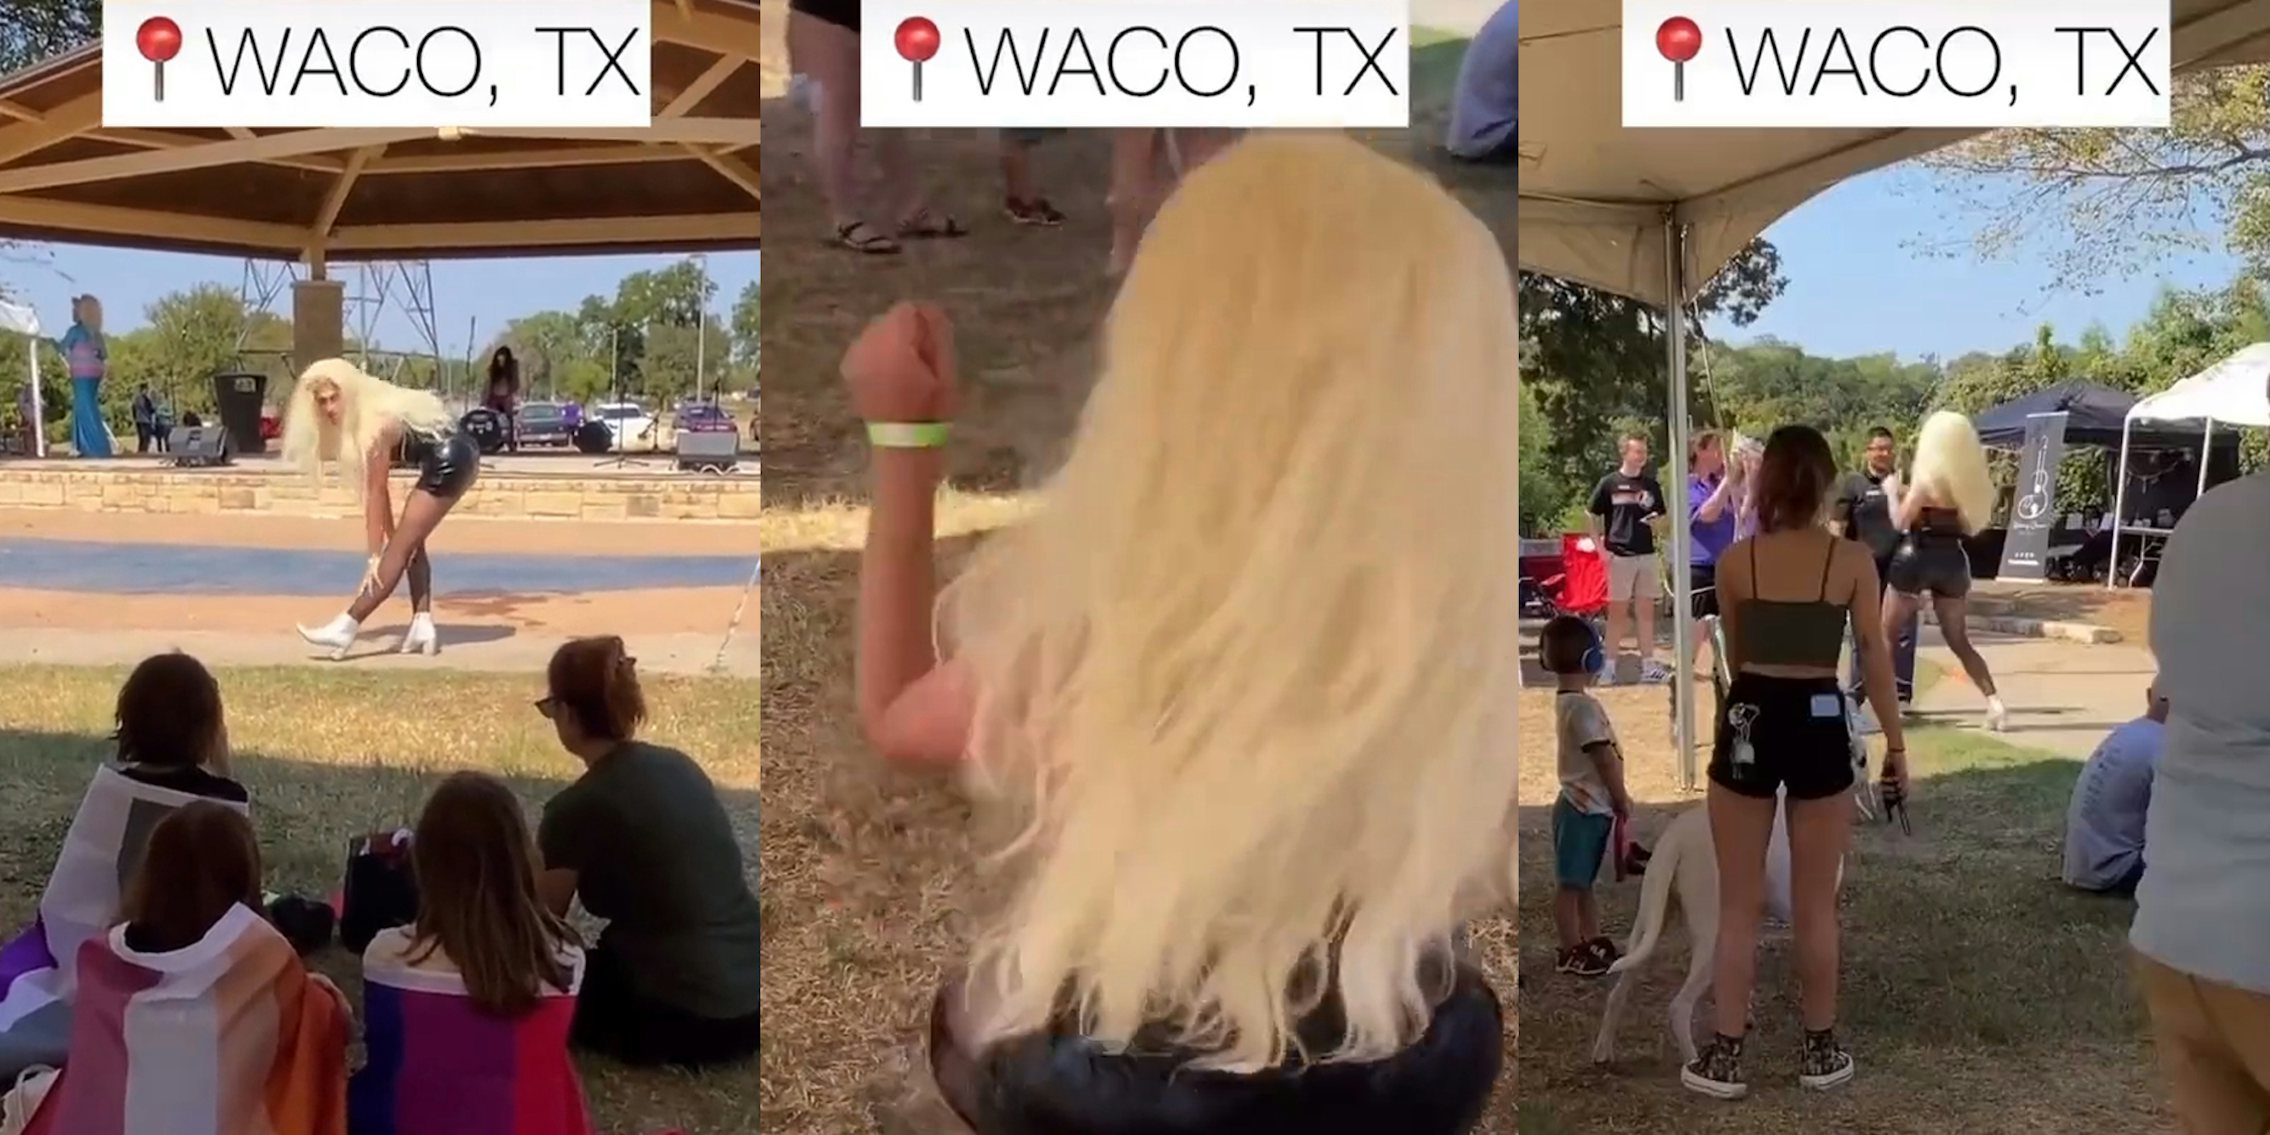 Drag Queen Harlotte Hussy dancing for all ages pride event outside with caption 'WACO, TX' (l) Drag Queen Harlotte Hussy dancing for all ages pride event outside with caption 'WACO, TX' (c) Drag Queen Harlotte Hussy dancing for all ages pride event outside with caption 'WACO, TX' (r)